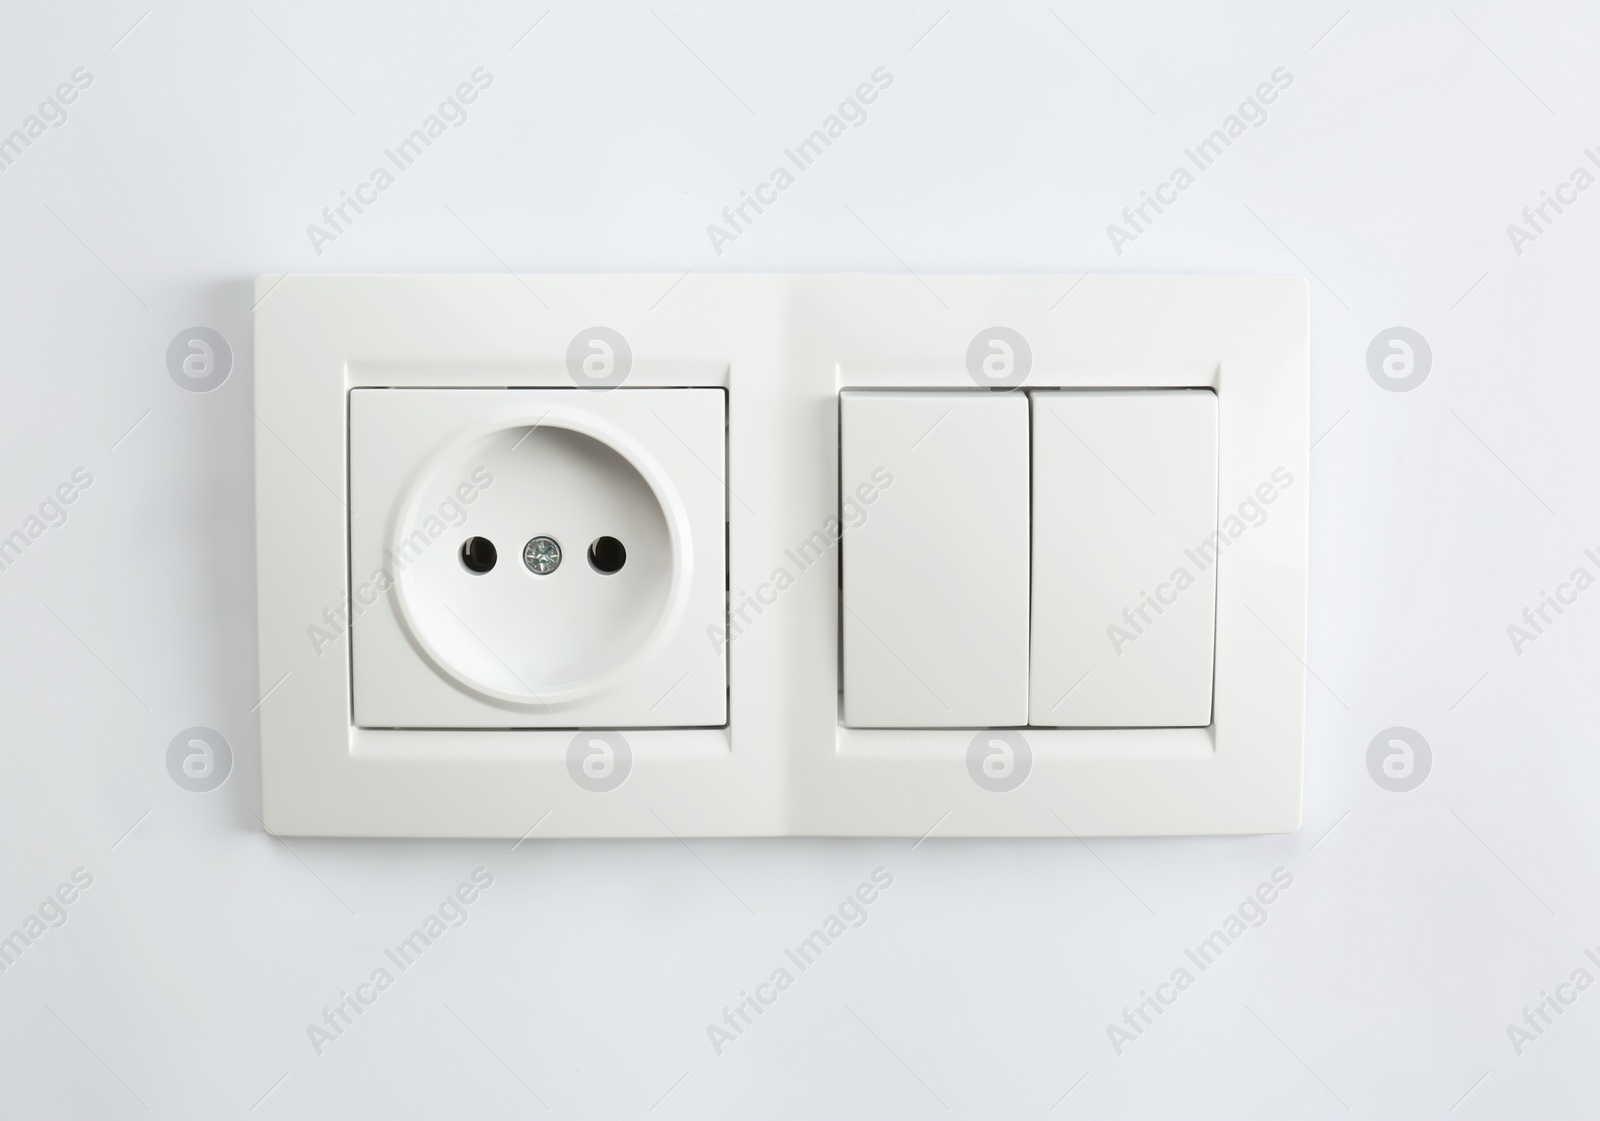 Photo of Light switch and power socket on white background. Electrician's equipment